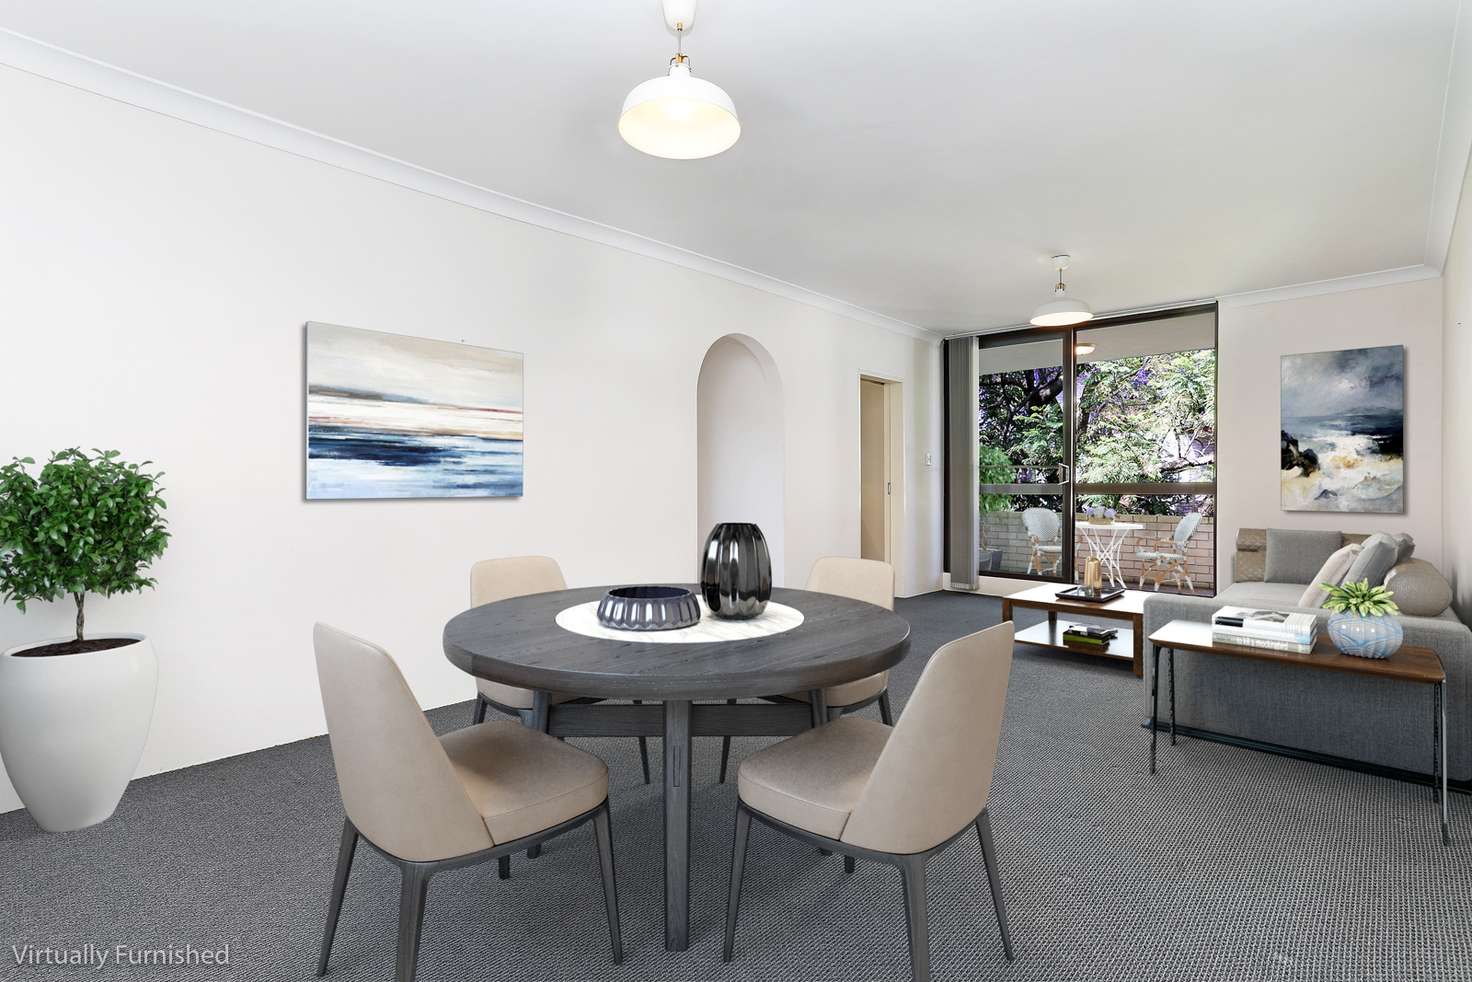 Main view of Homely apartment listing, 19/20-24 Tranmere Street, Drummoyne NSW 2047